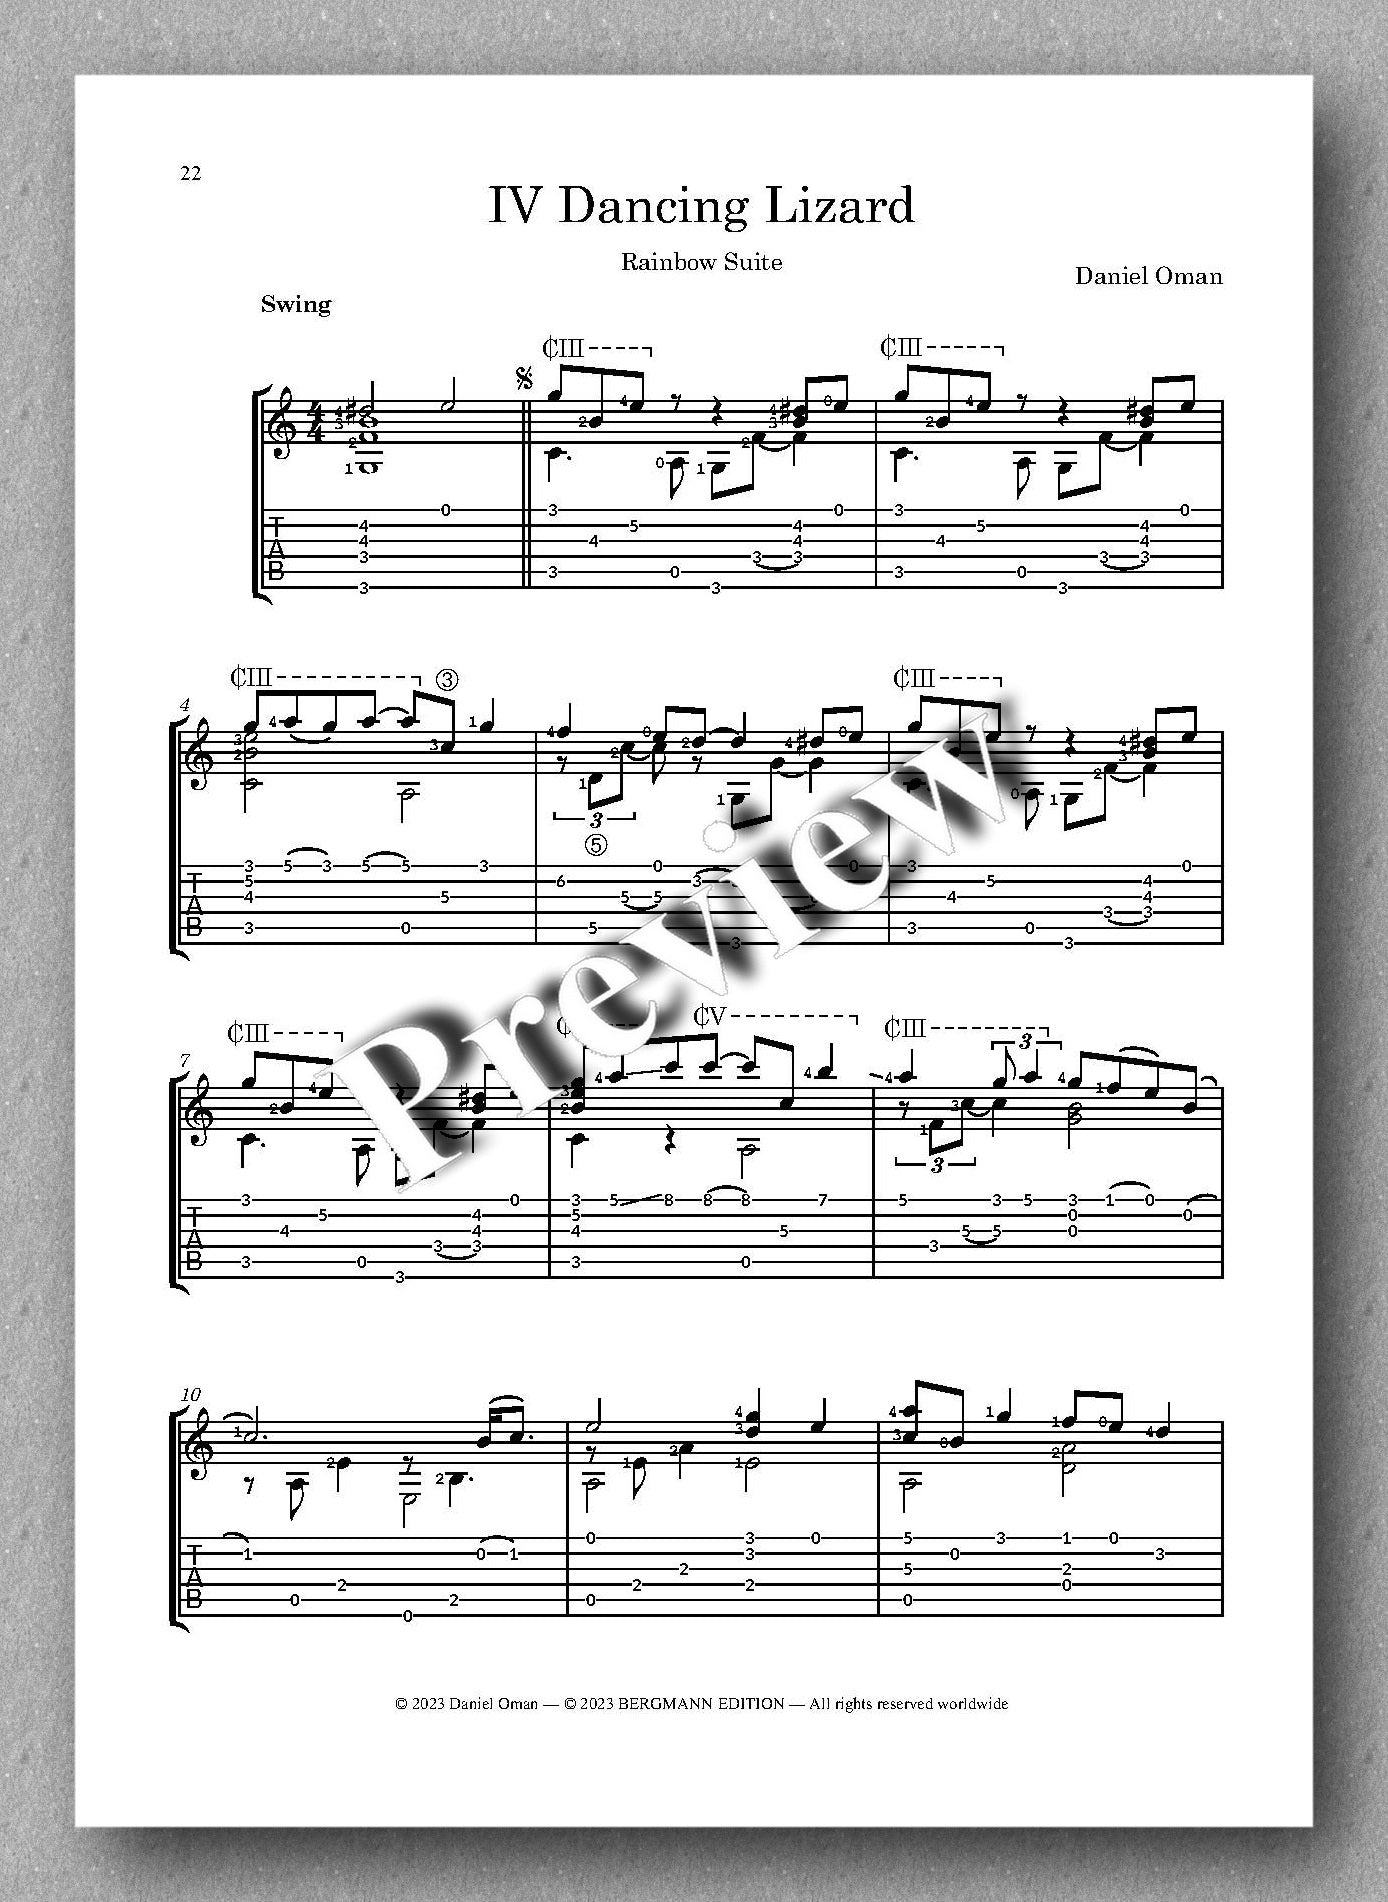 Daniel Oman, Rainbow Suite - preview of the Music score -TAB version 2